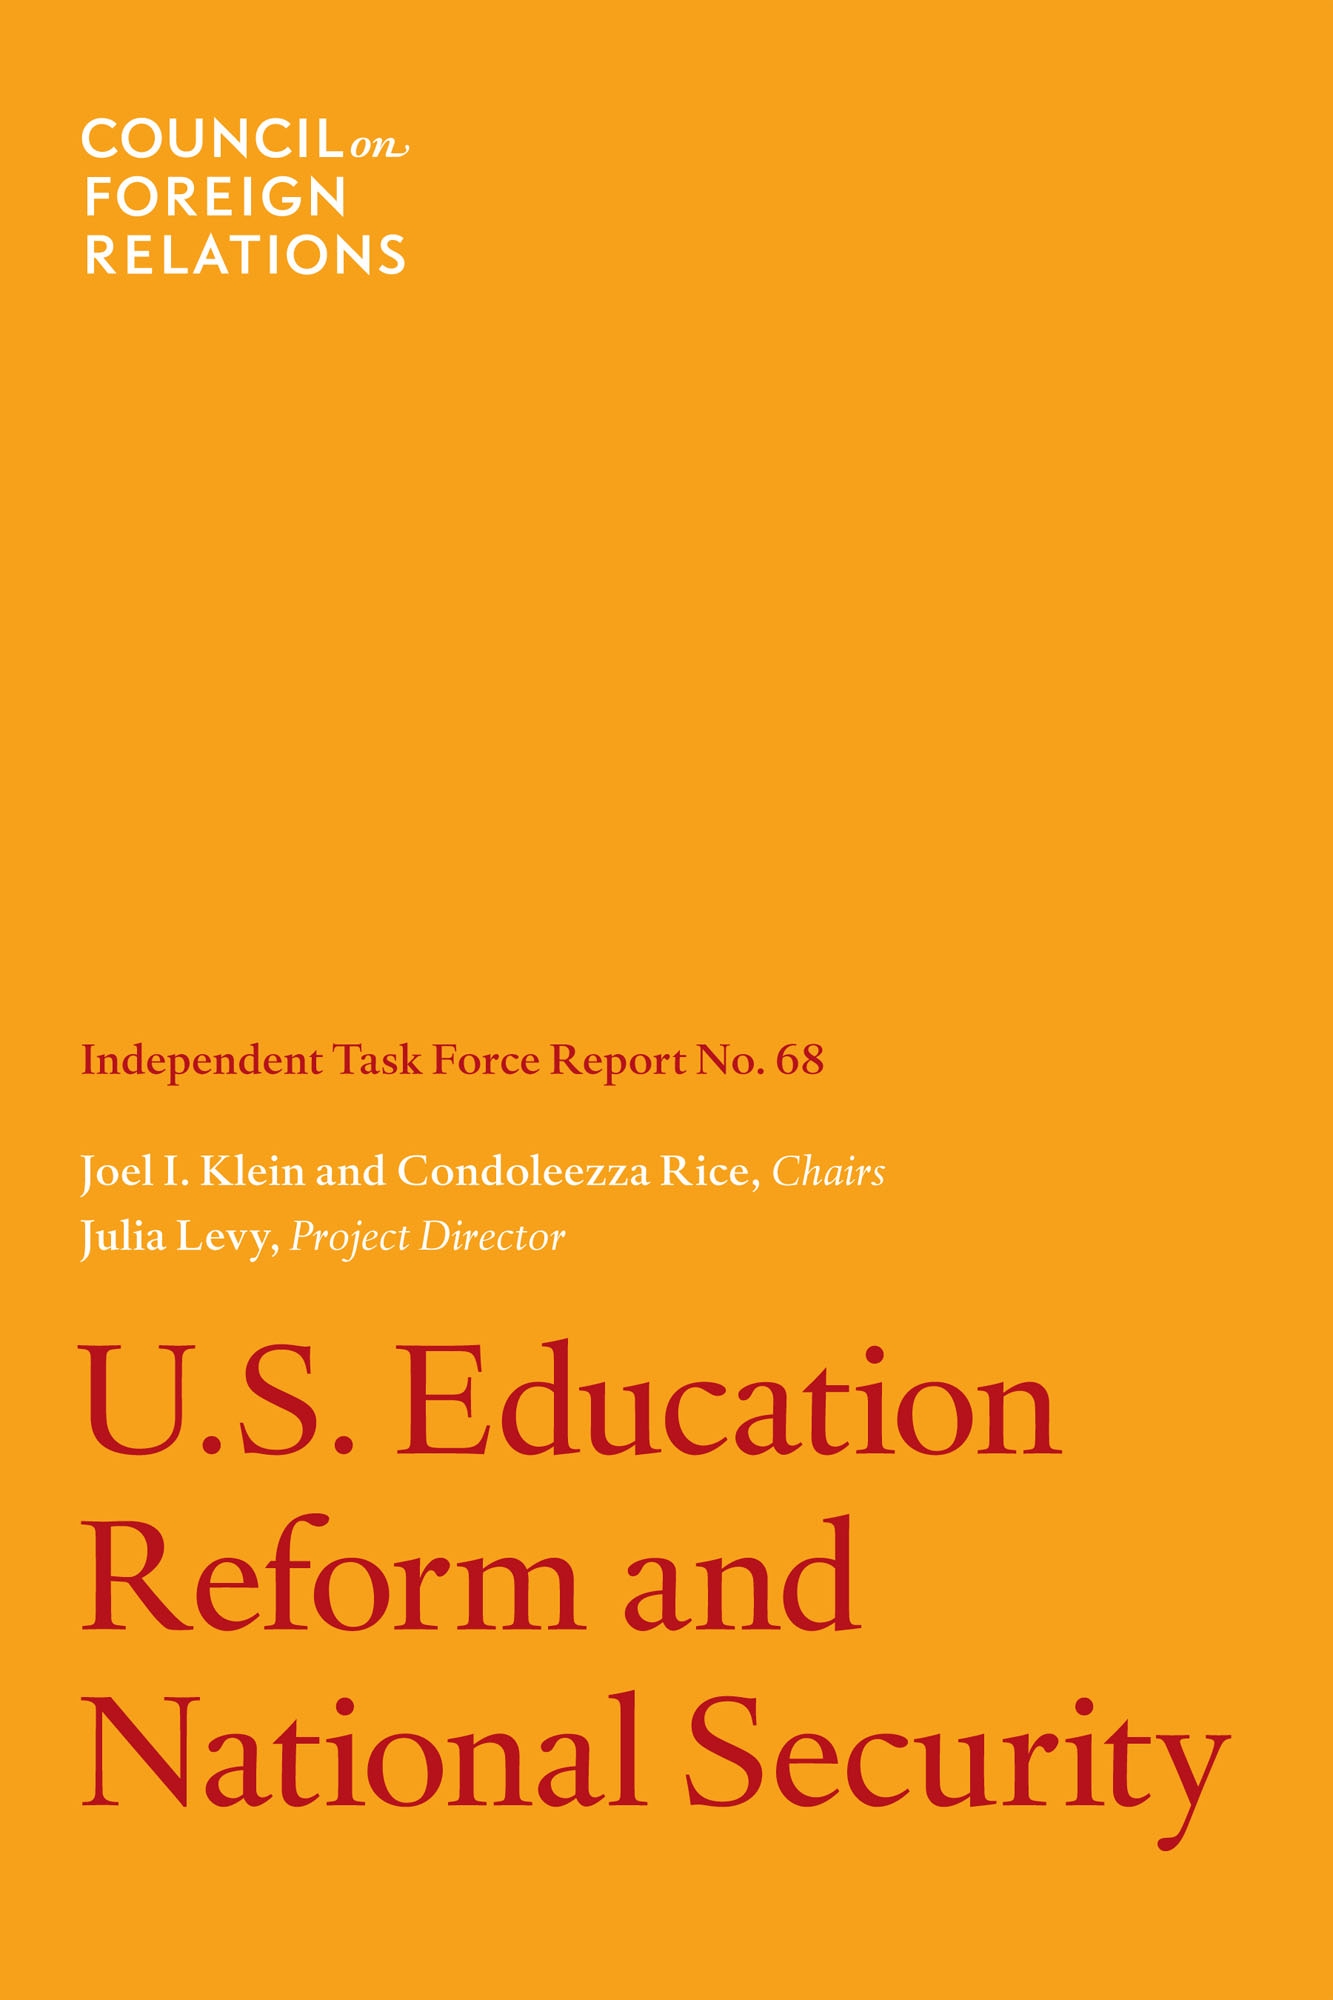 Former Secretary of State Condoleezza Rice and Chancellor for the New York City Department of Education Joel I. Klein chair the Task Force on Education Reform,